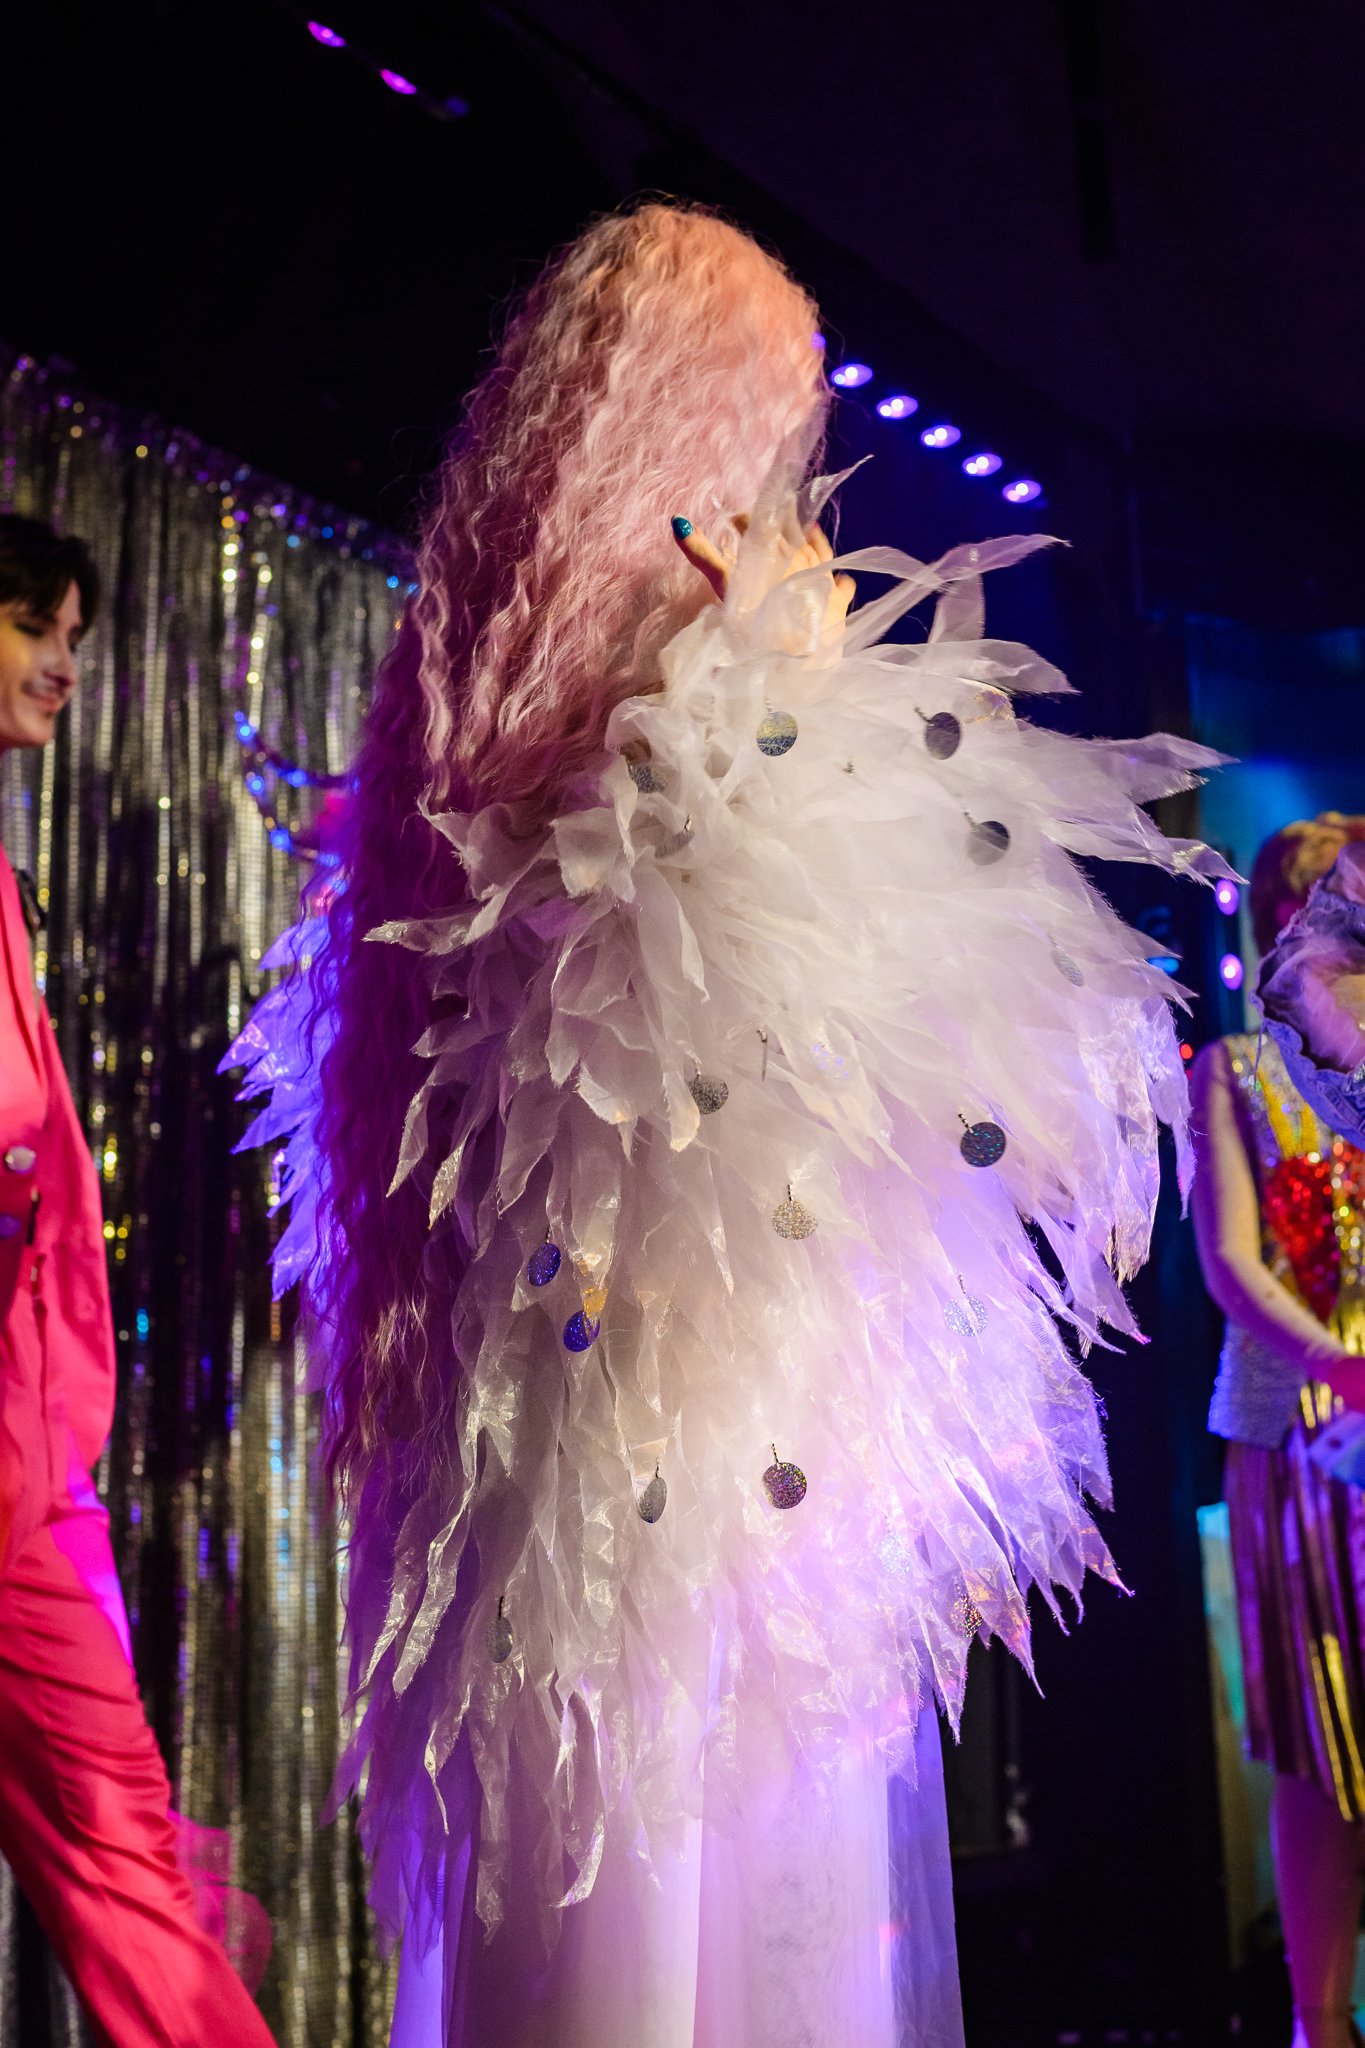   Drag performer Cherrylynn Fizzle Pop on stage with the cast at the end of the show  